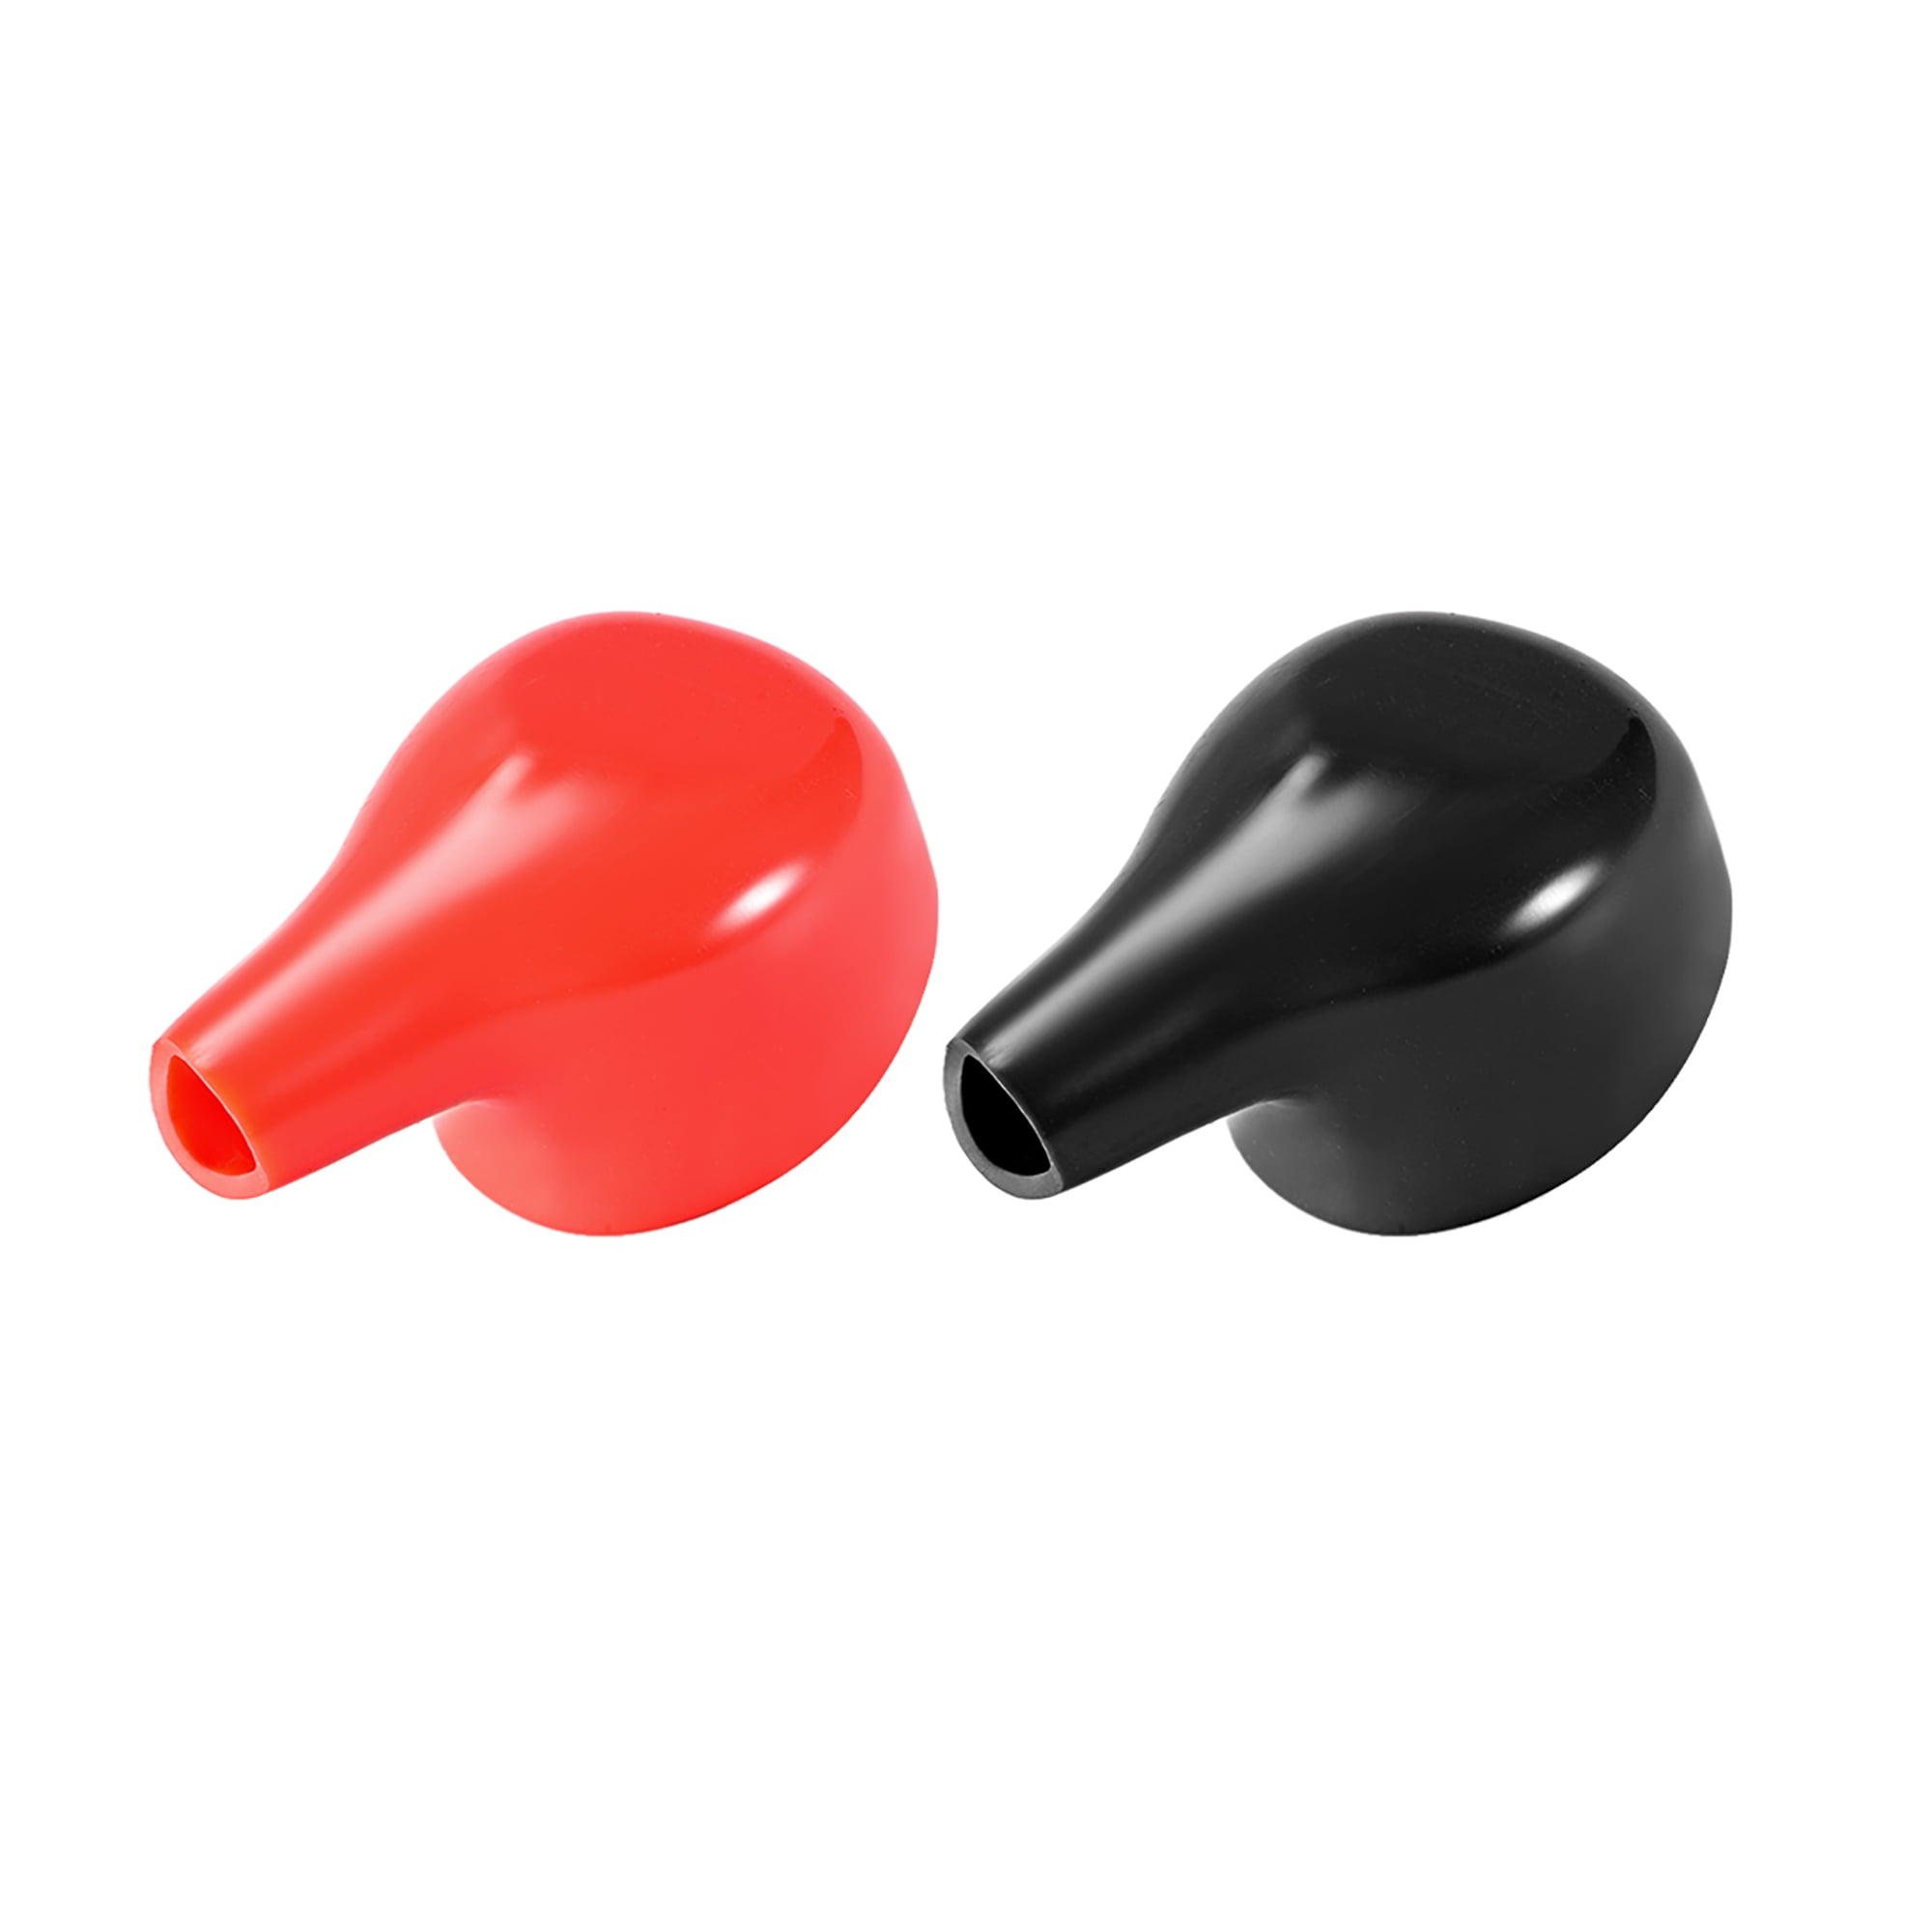 uxcell Battery Terminal Insulating Rubber Protector Covers for 8mm Terminal 15mm Cable Red Black 1 Pair 